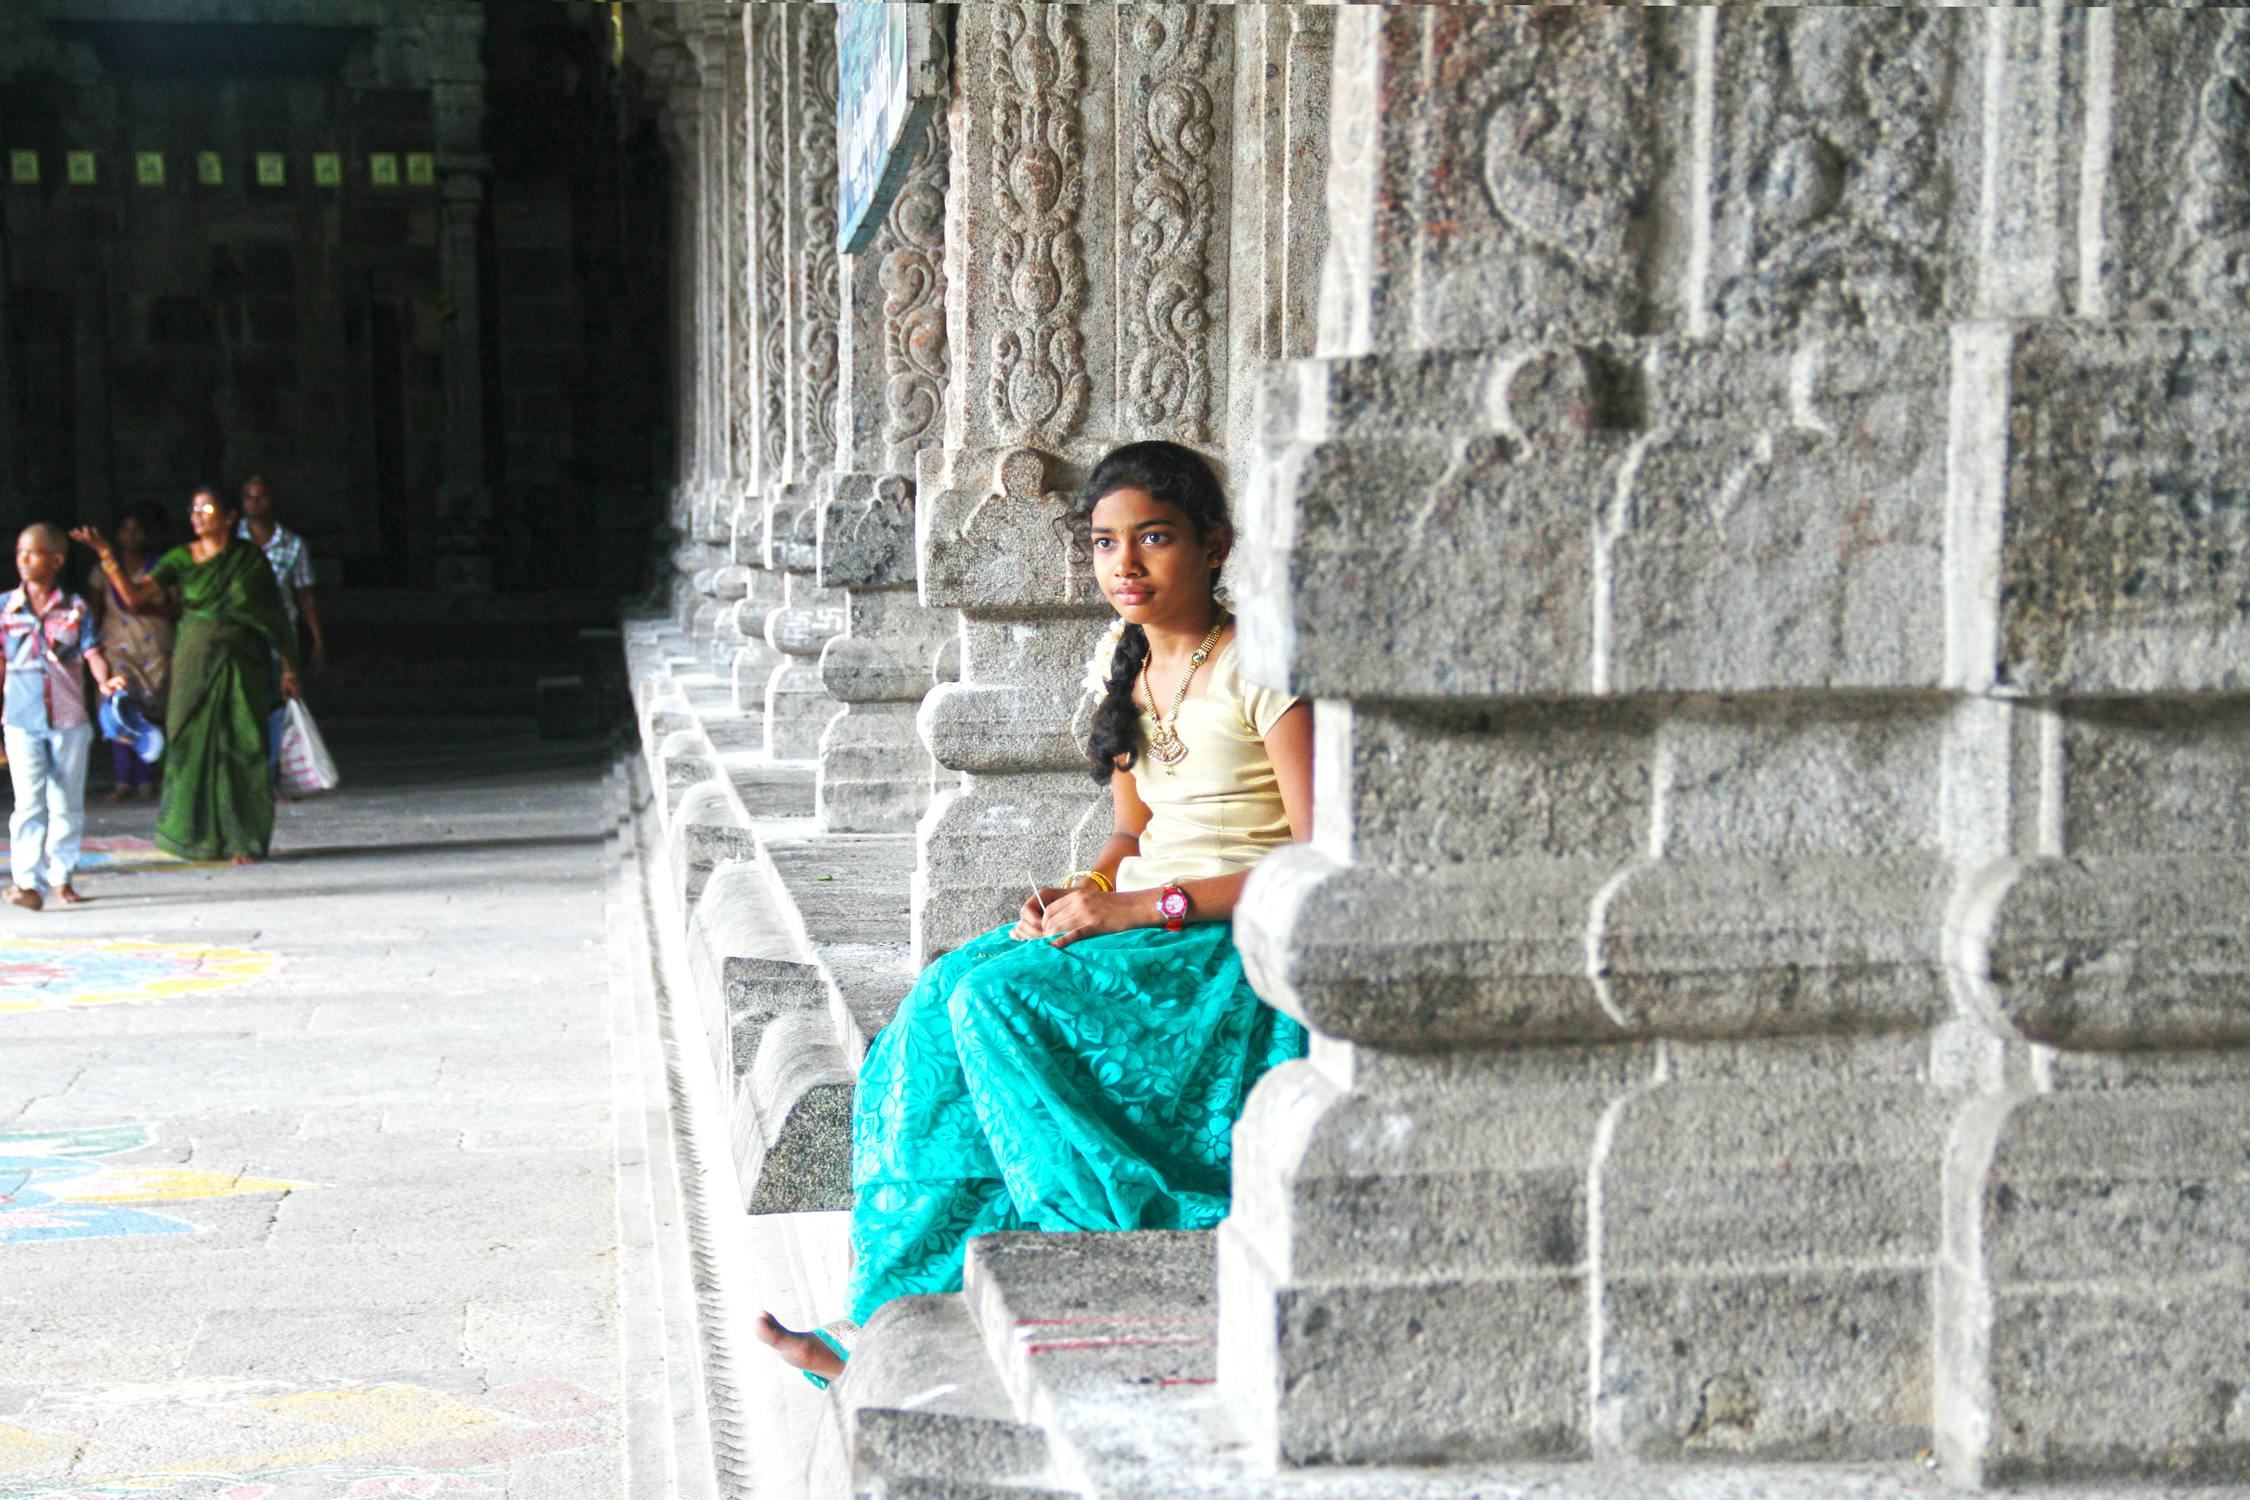 Indian Girl in Temple Photo by Sharath G. from Pexels: https://www.pexels.com/photo/girl-sitting-near-pillars-2090592/